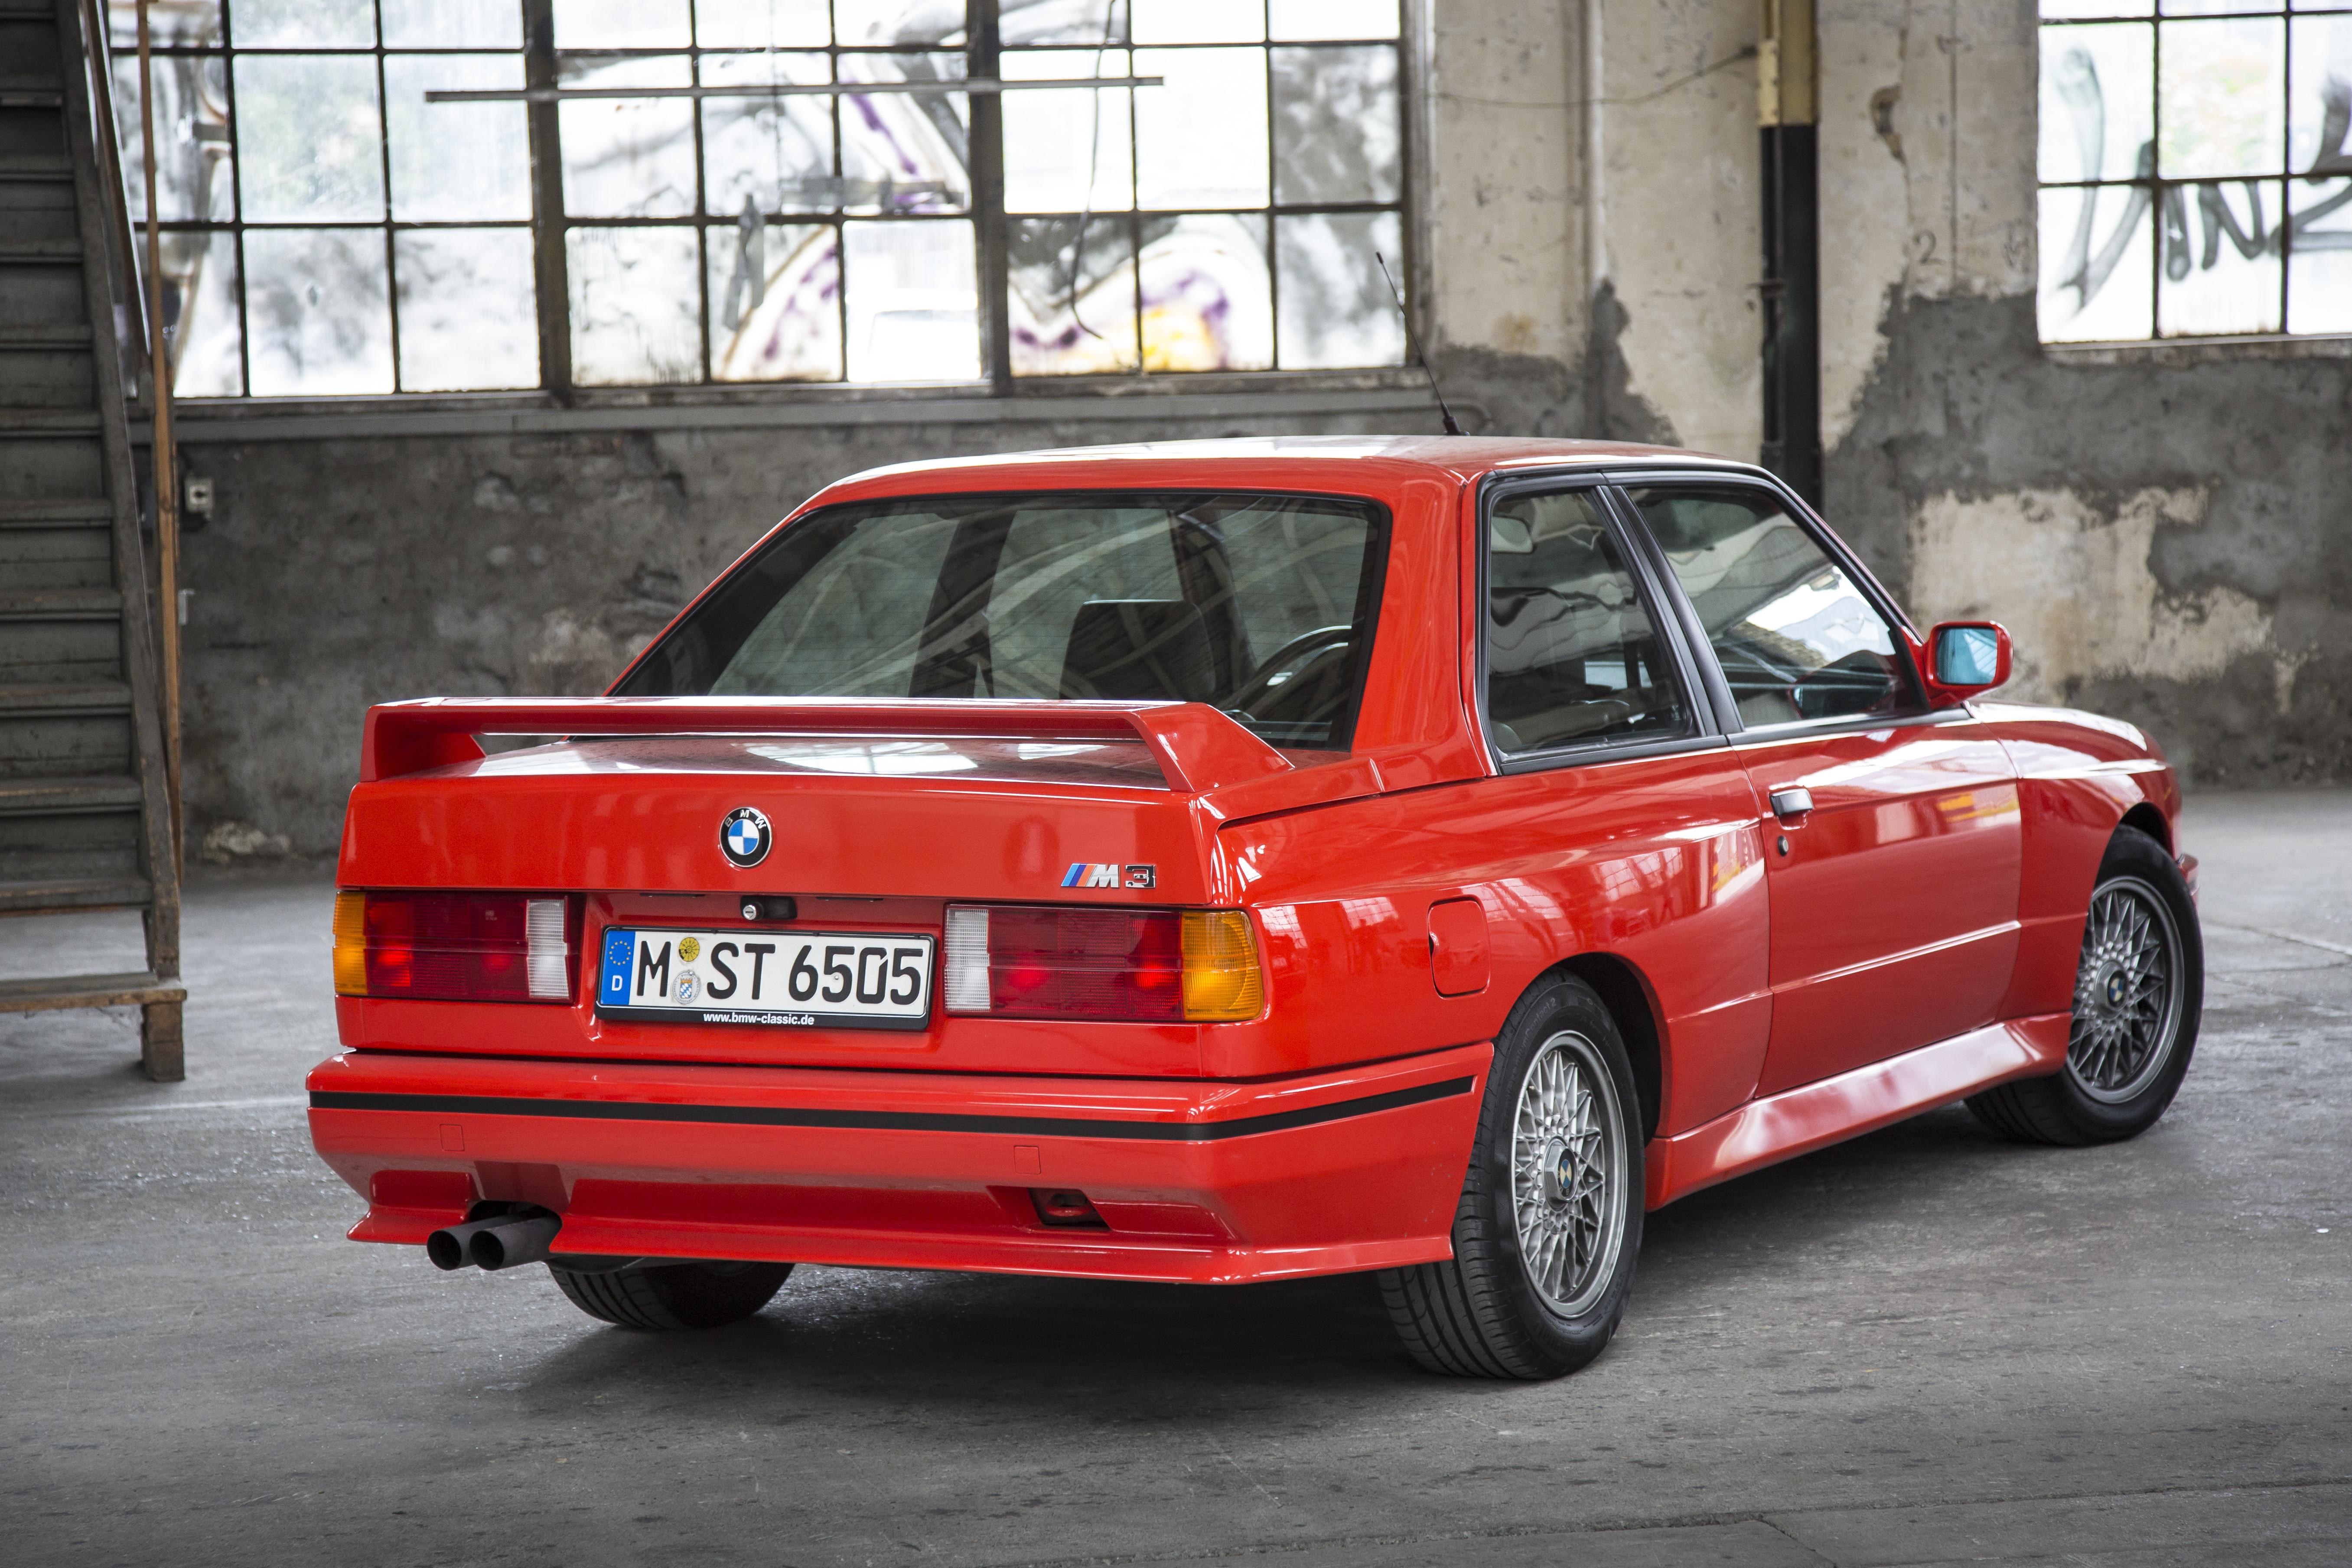 Bmw m 30. BMW m3 e30. BMW 3 e30. BMW e30 m3 седан. BMW m3 e30 Red.